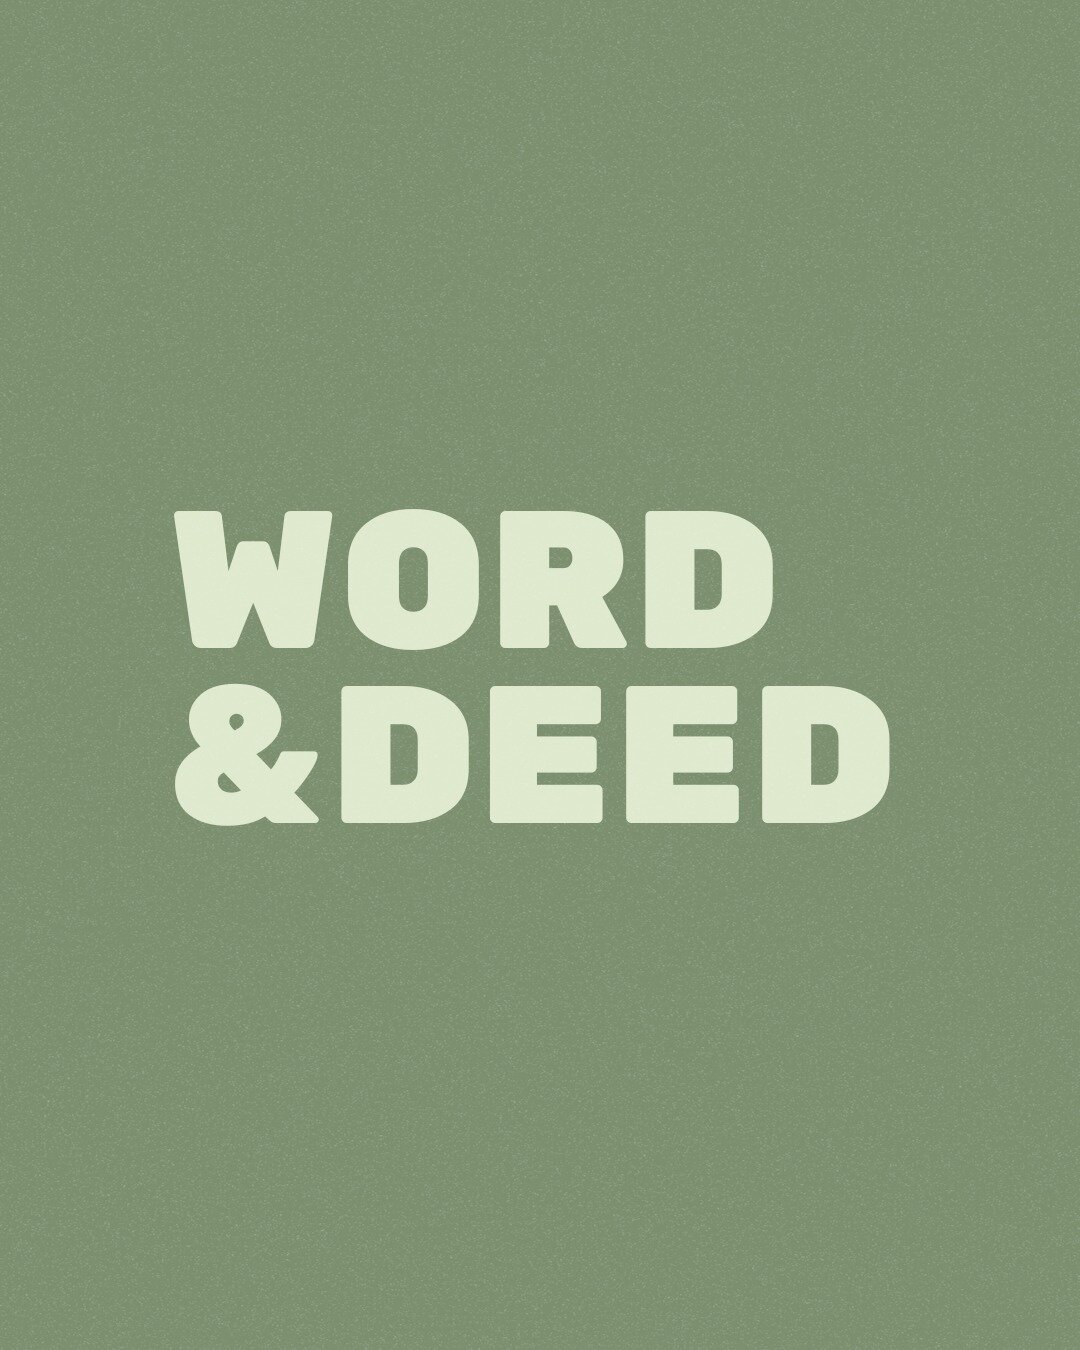 We haven&rsquo;t &ldquo;fully preached&rdquo; the gospel if 
our words aren&rsquo;t paired with our deeds, or if they&rsquo;re not demonstrating the power of God to change lives.